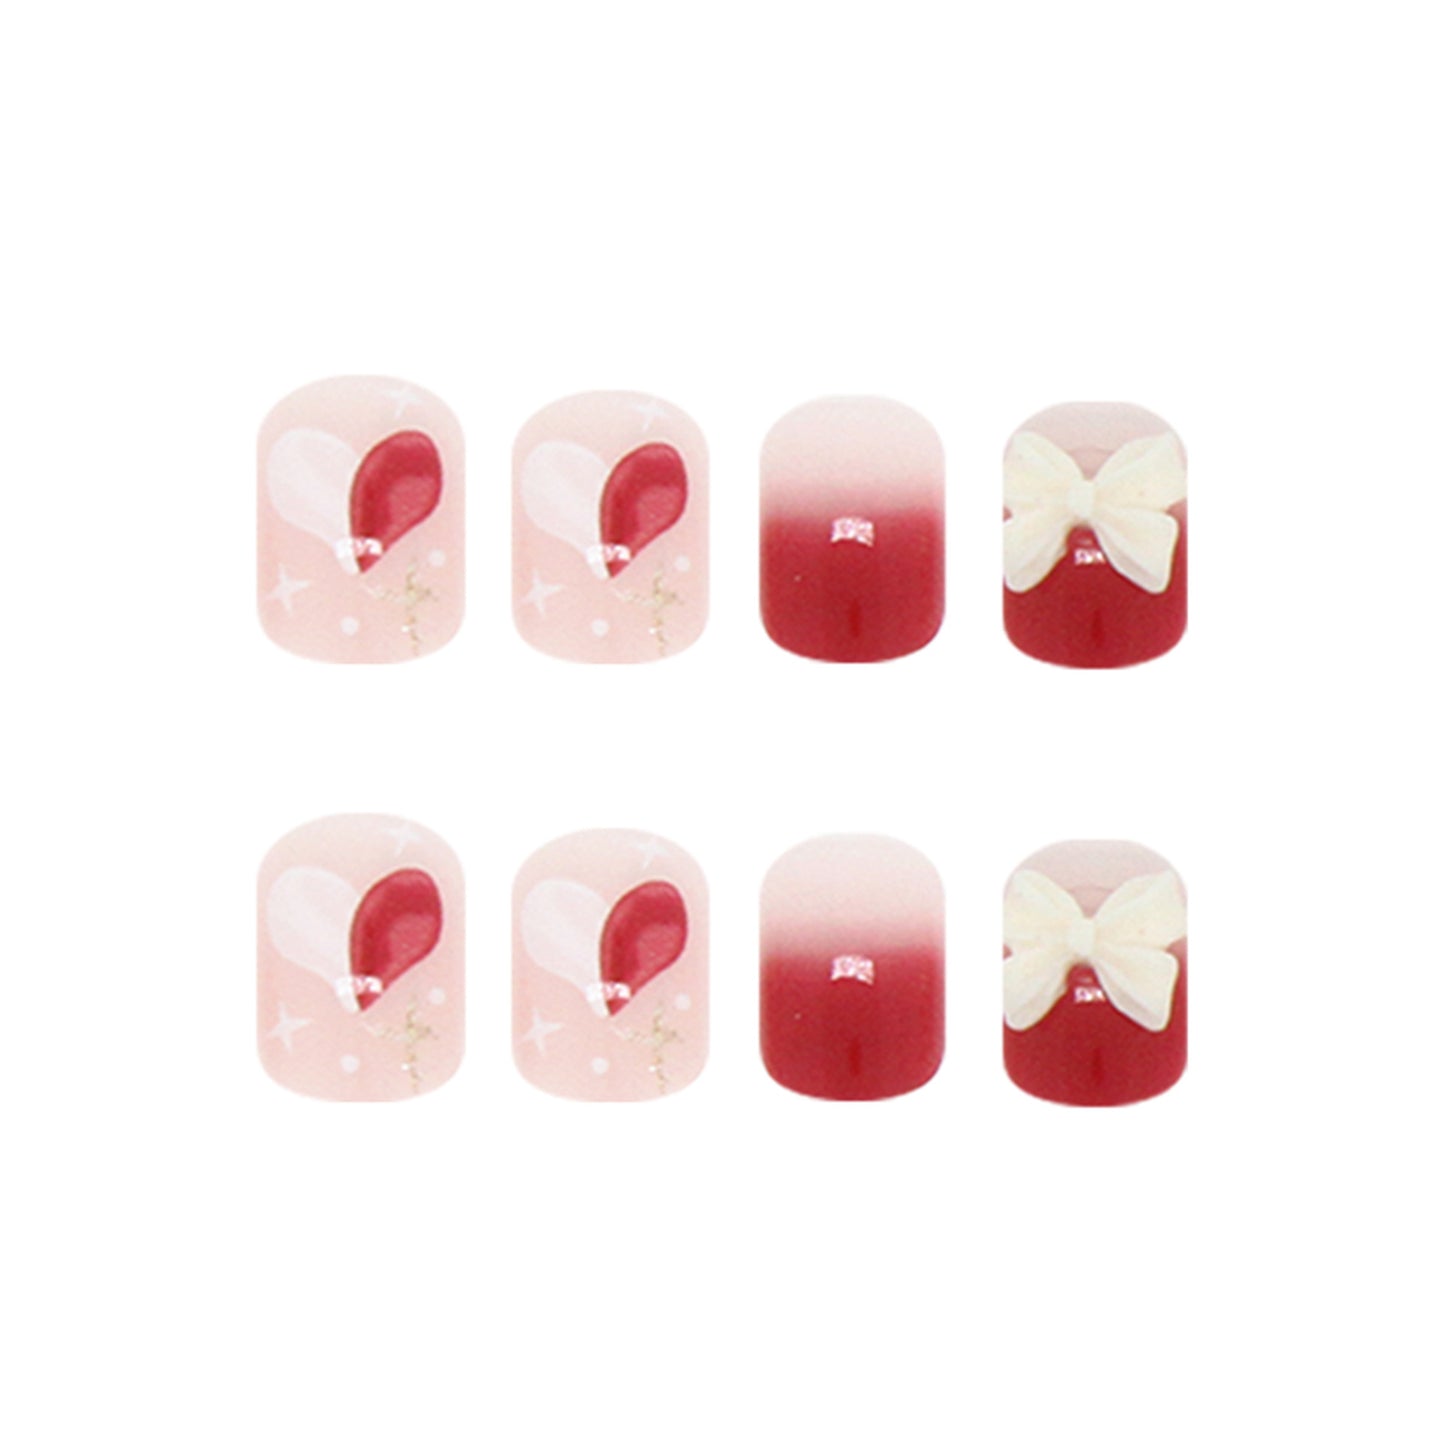 Red-White Press On Nails - 24 pieces per pack